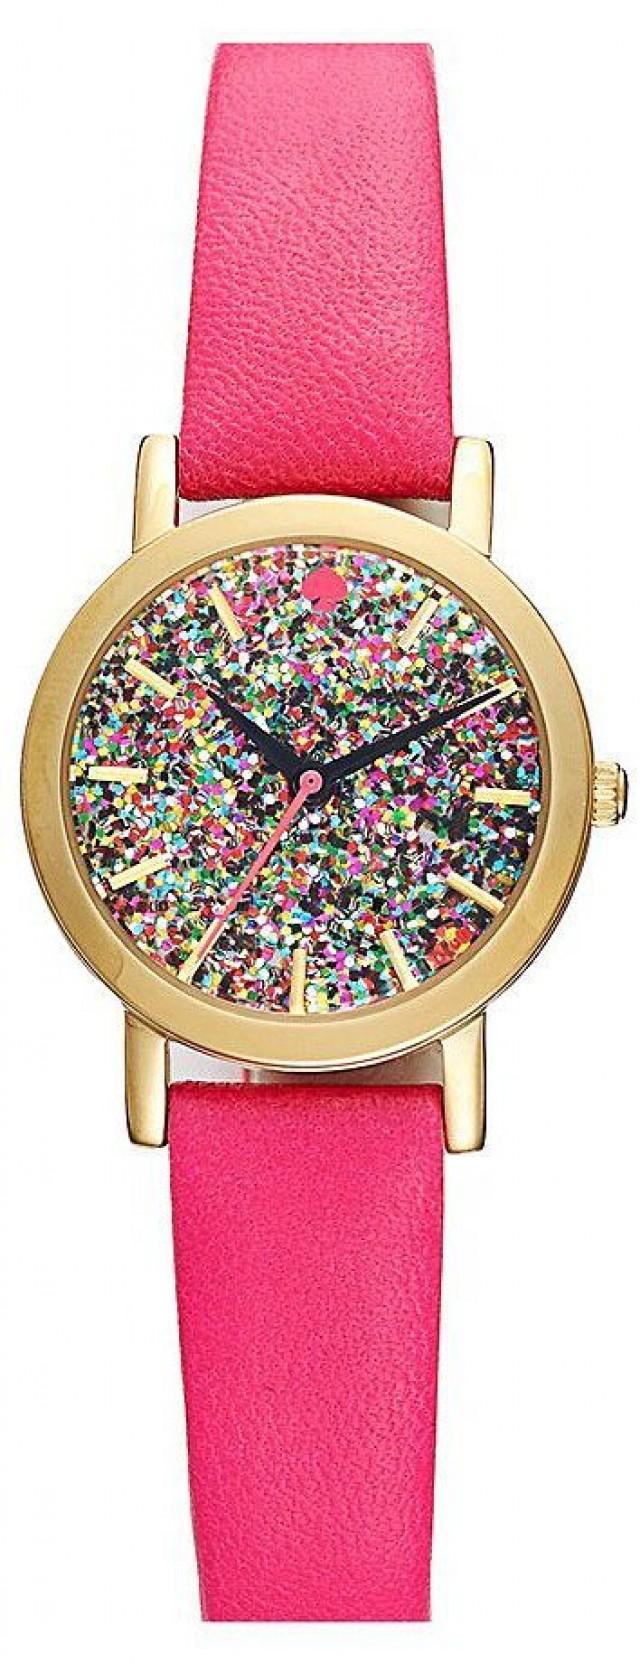 Kate Spade Glitter Watch ~ Celebrating New Years By Posting Glitter Shoes And Accessories ~ Be Sure To Come Back For More :) Pin More If You Have S… 